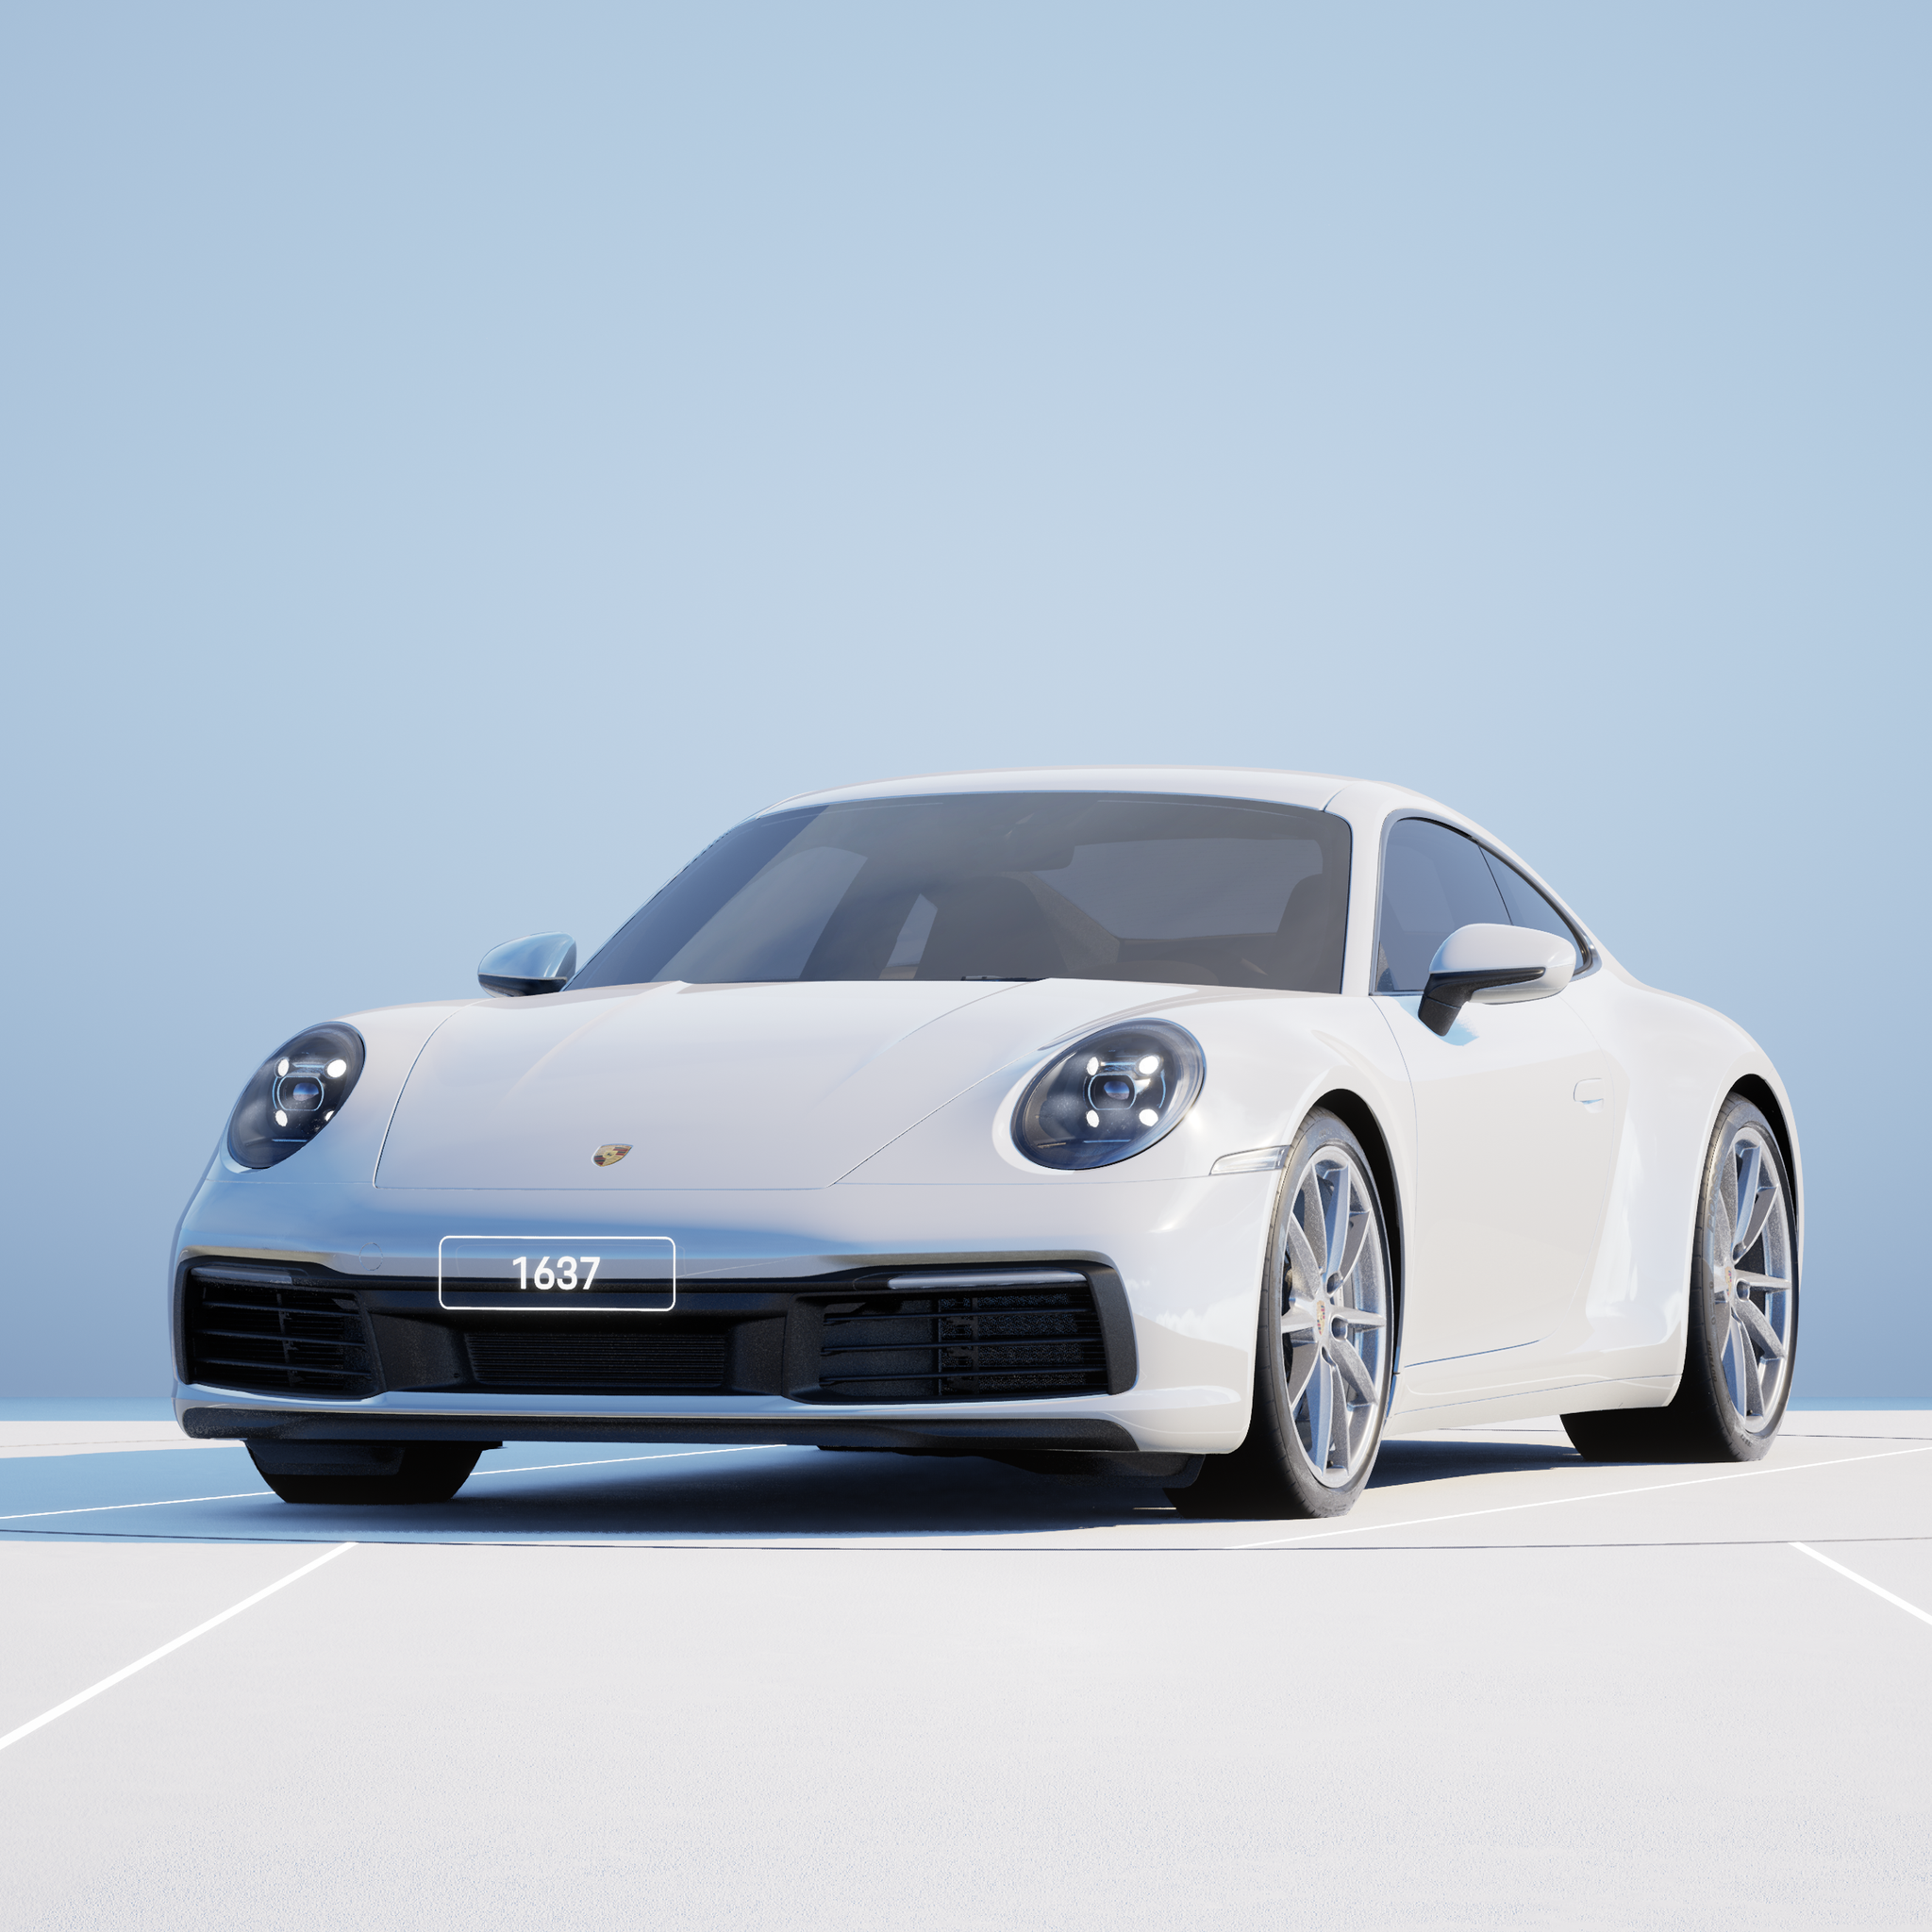 The PORSCHΞ 911 1637 image in phase